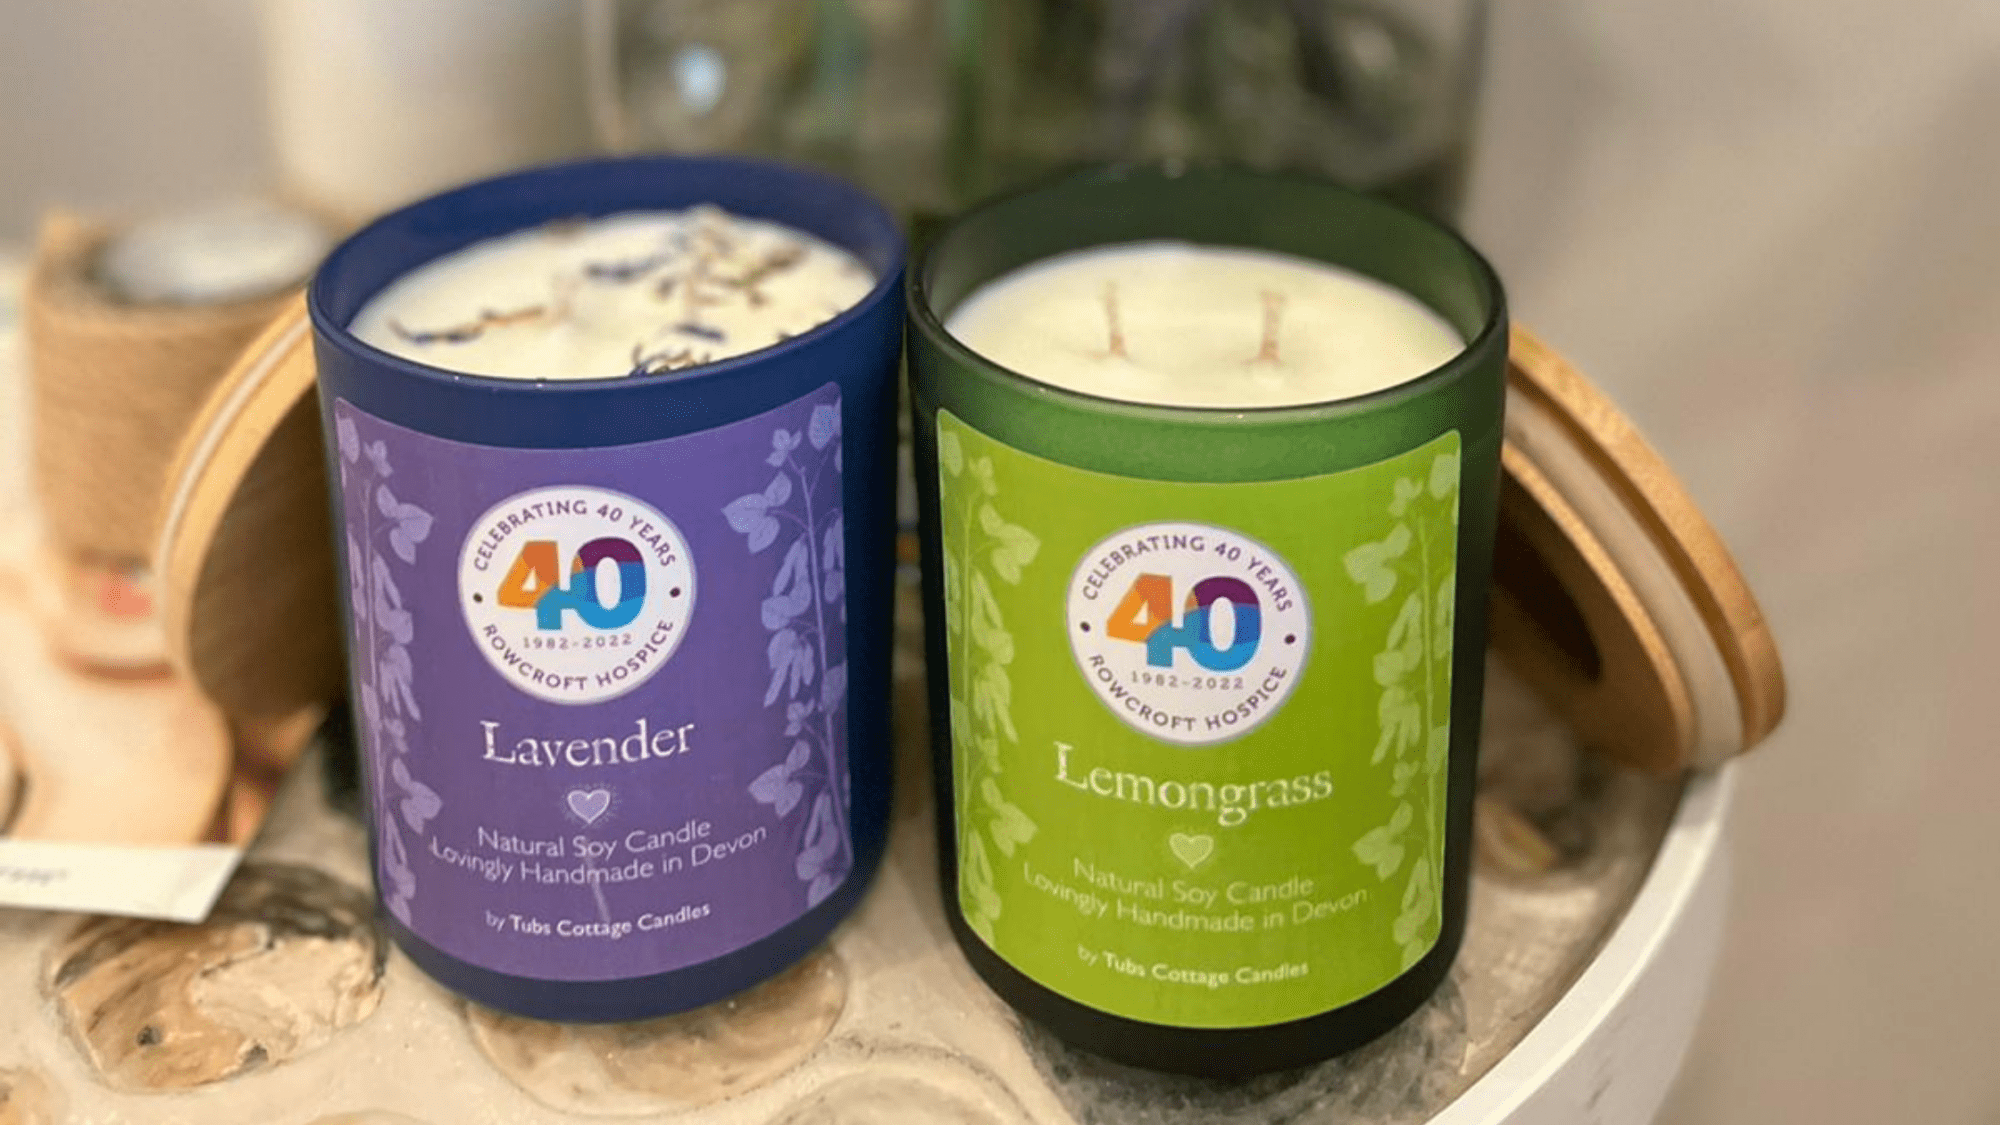 The lemongrass and lavender 40th anniversary candles are on display.